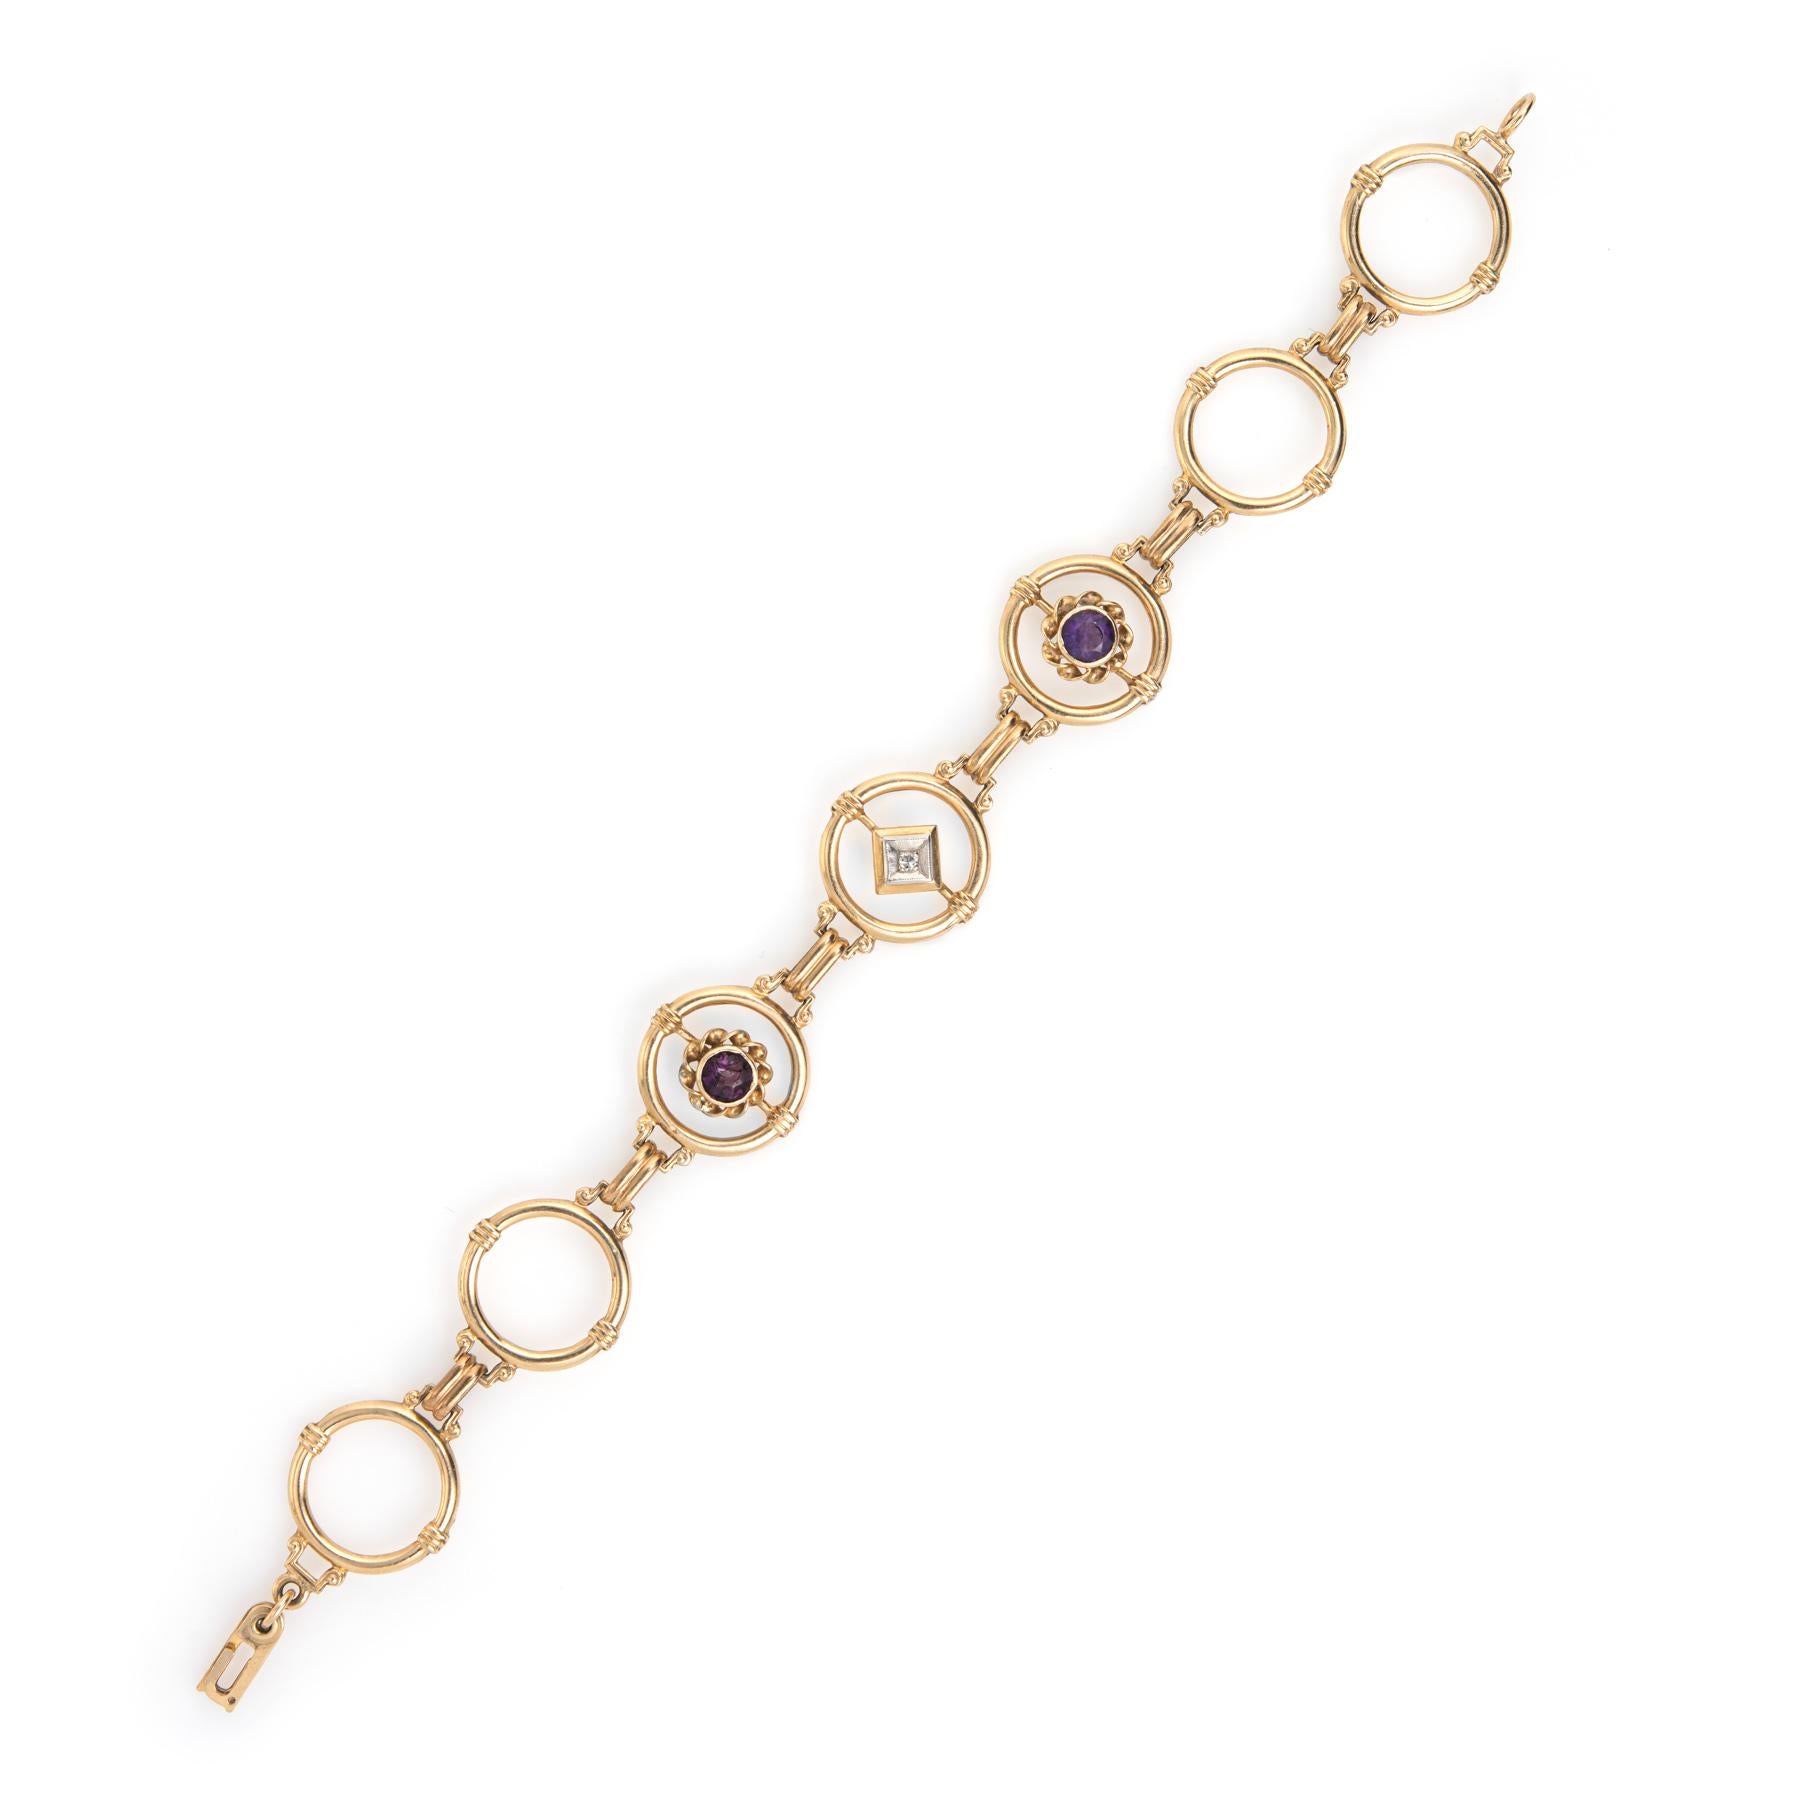 Stylish and elegant vintage Art Deco era bracelet (circa 1920s to 1930s), crafted in 10 karat yellow gold. 

Two amethysts are estimated at 0.20 carats each, accented with an estimated 0.01 carat single cut diamond. Note: chip to one amethyst